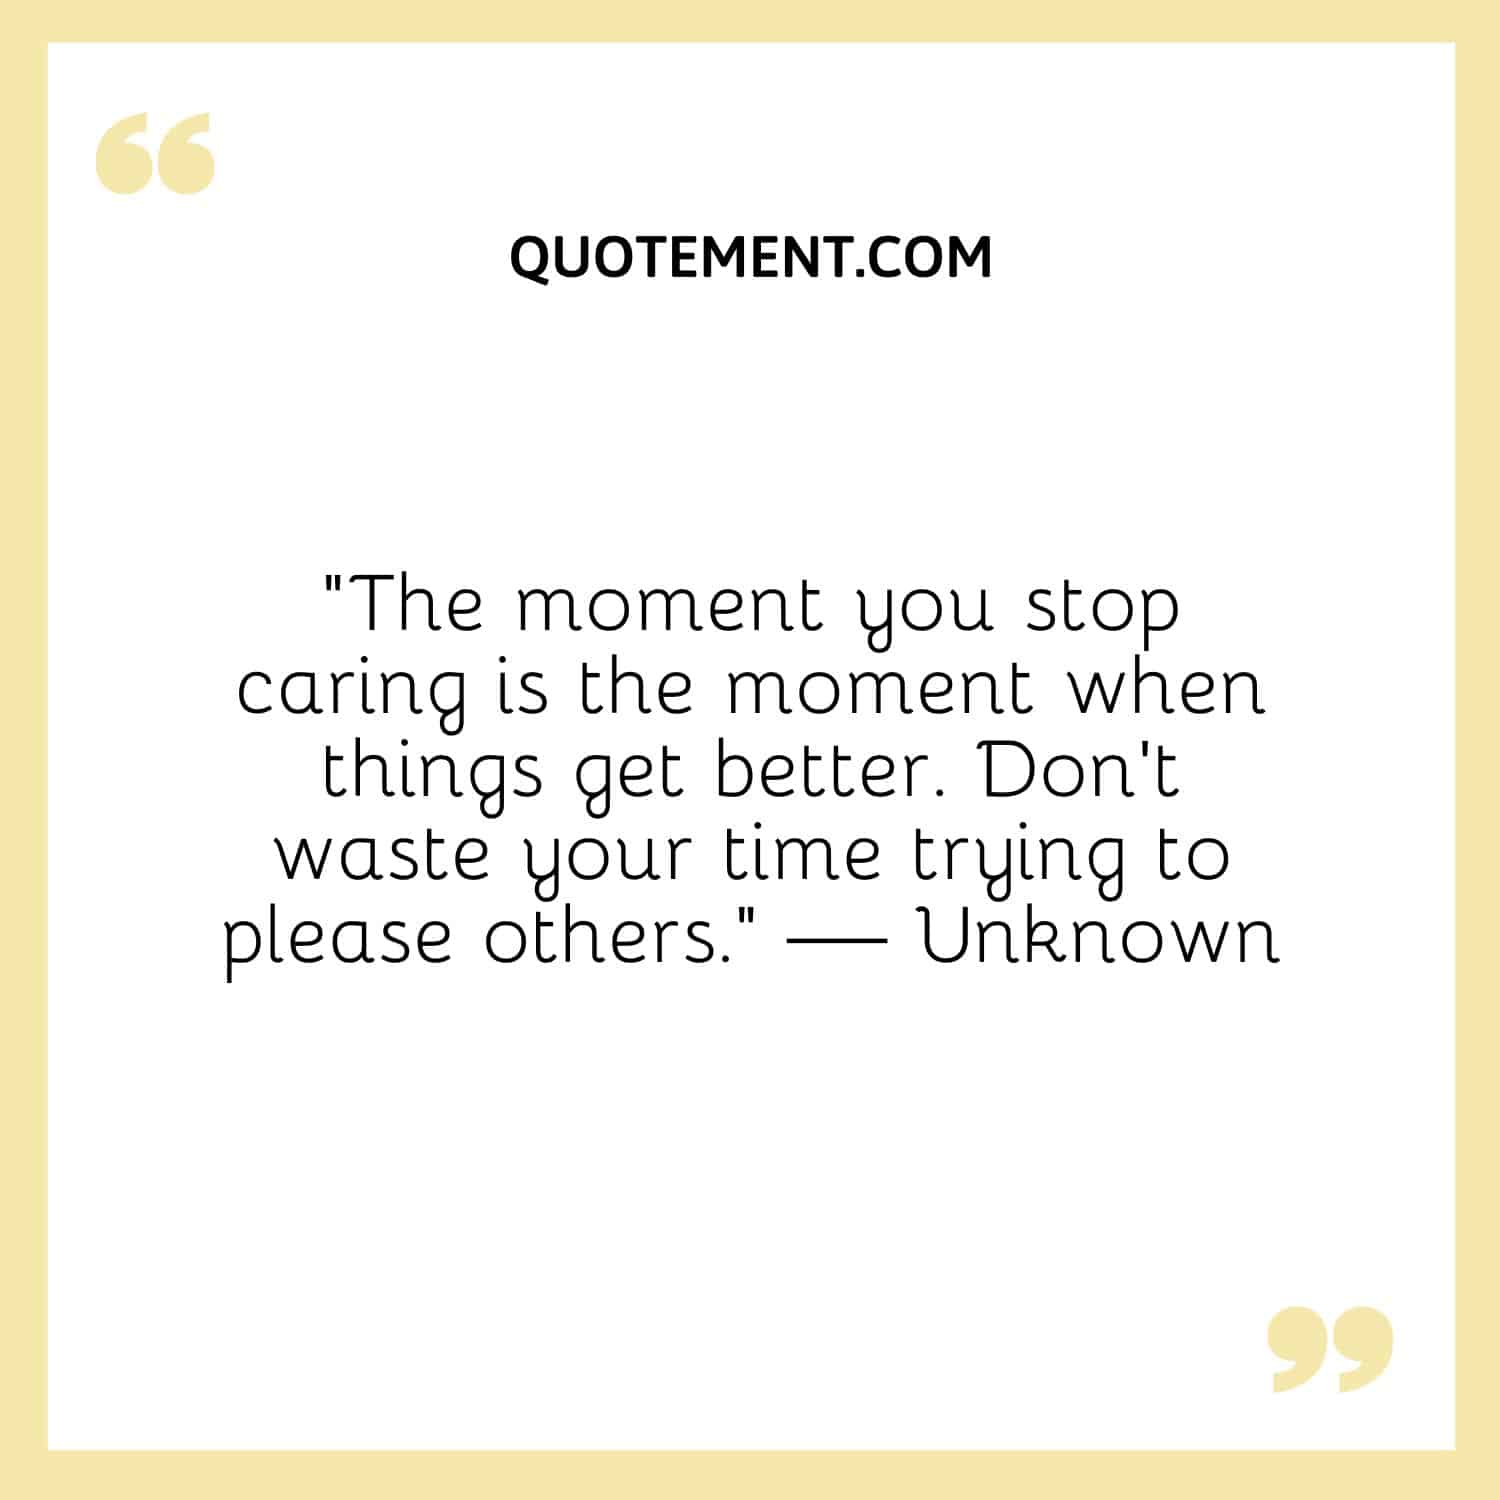 The moment you stop caring is the moment when things get better. Don’t waste your time trying to please others